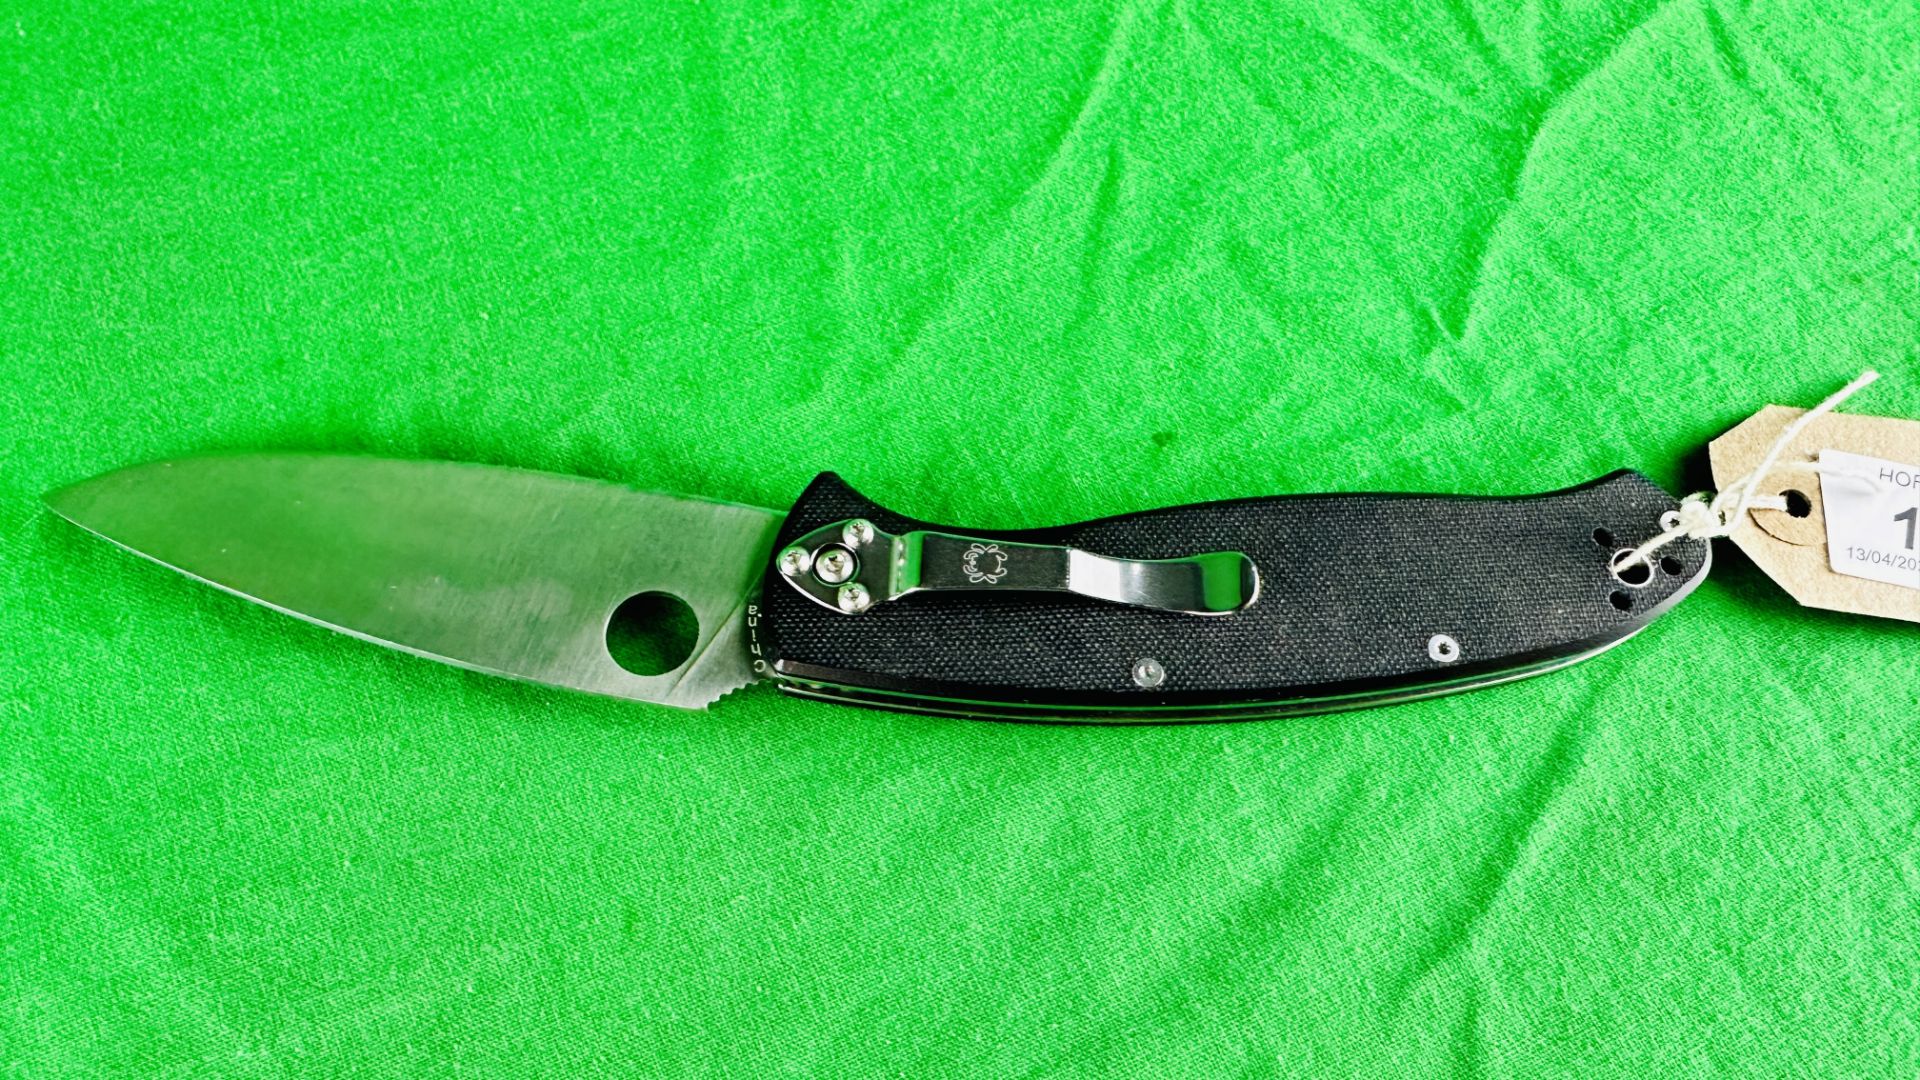 SYDERCO RESILIENCE C142GP FOLDING POCKET LOCK KNIFE - NO POSTAGE OR PACKING AVAILABLE - Image 6 of 7